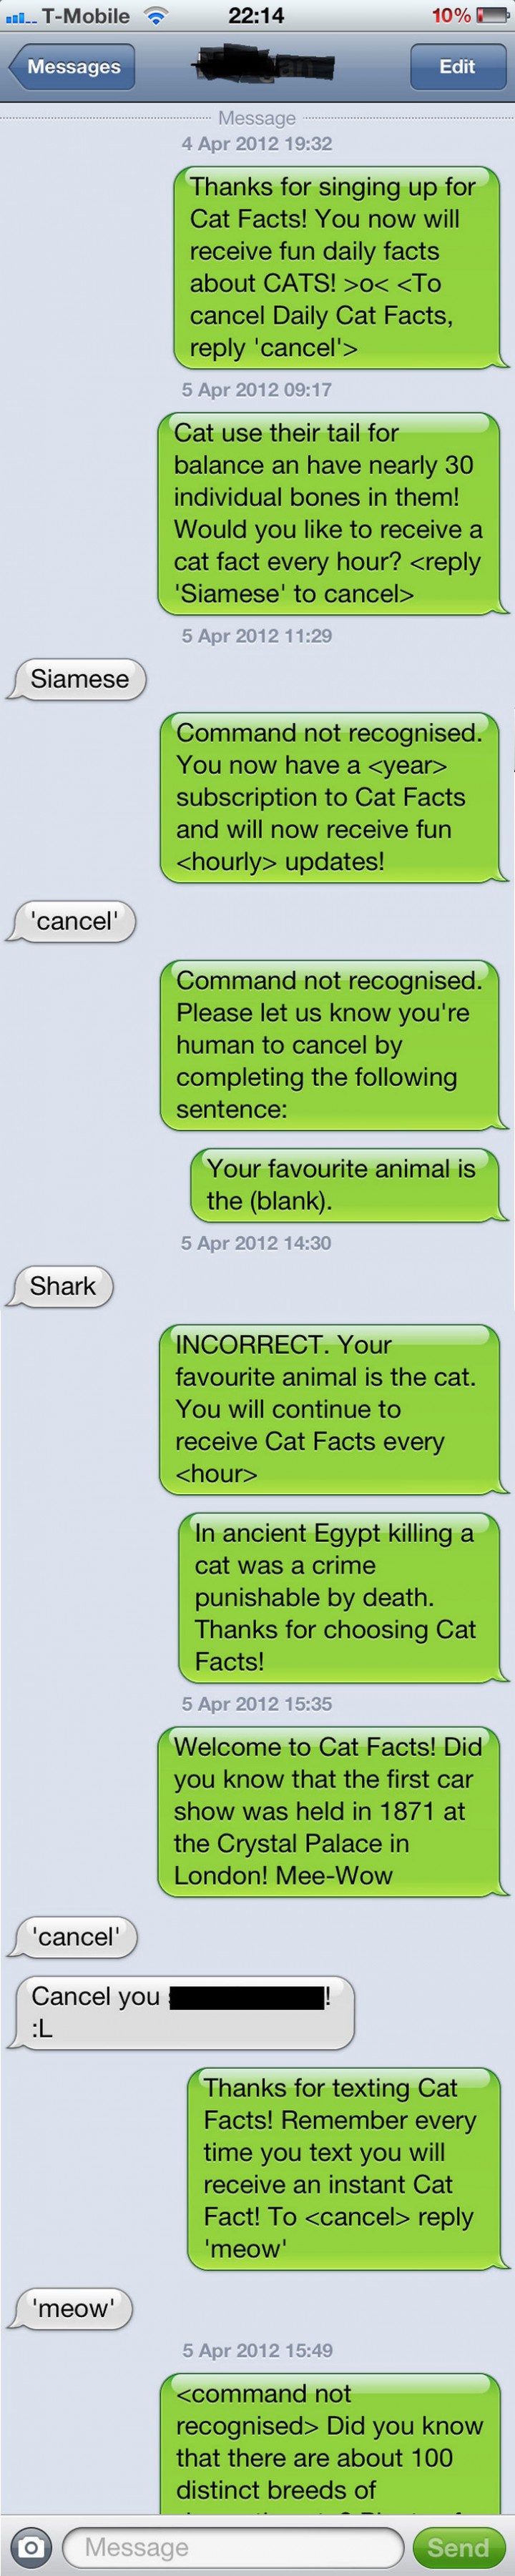 15 People With Ignored Text Messages When People Don't Text Back - He probably wishes he didn't signup for cat facts.